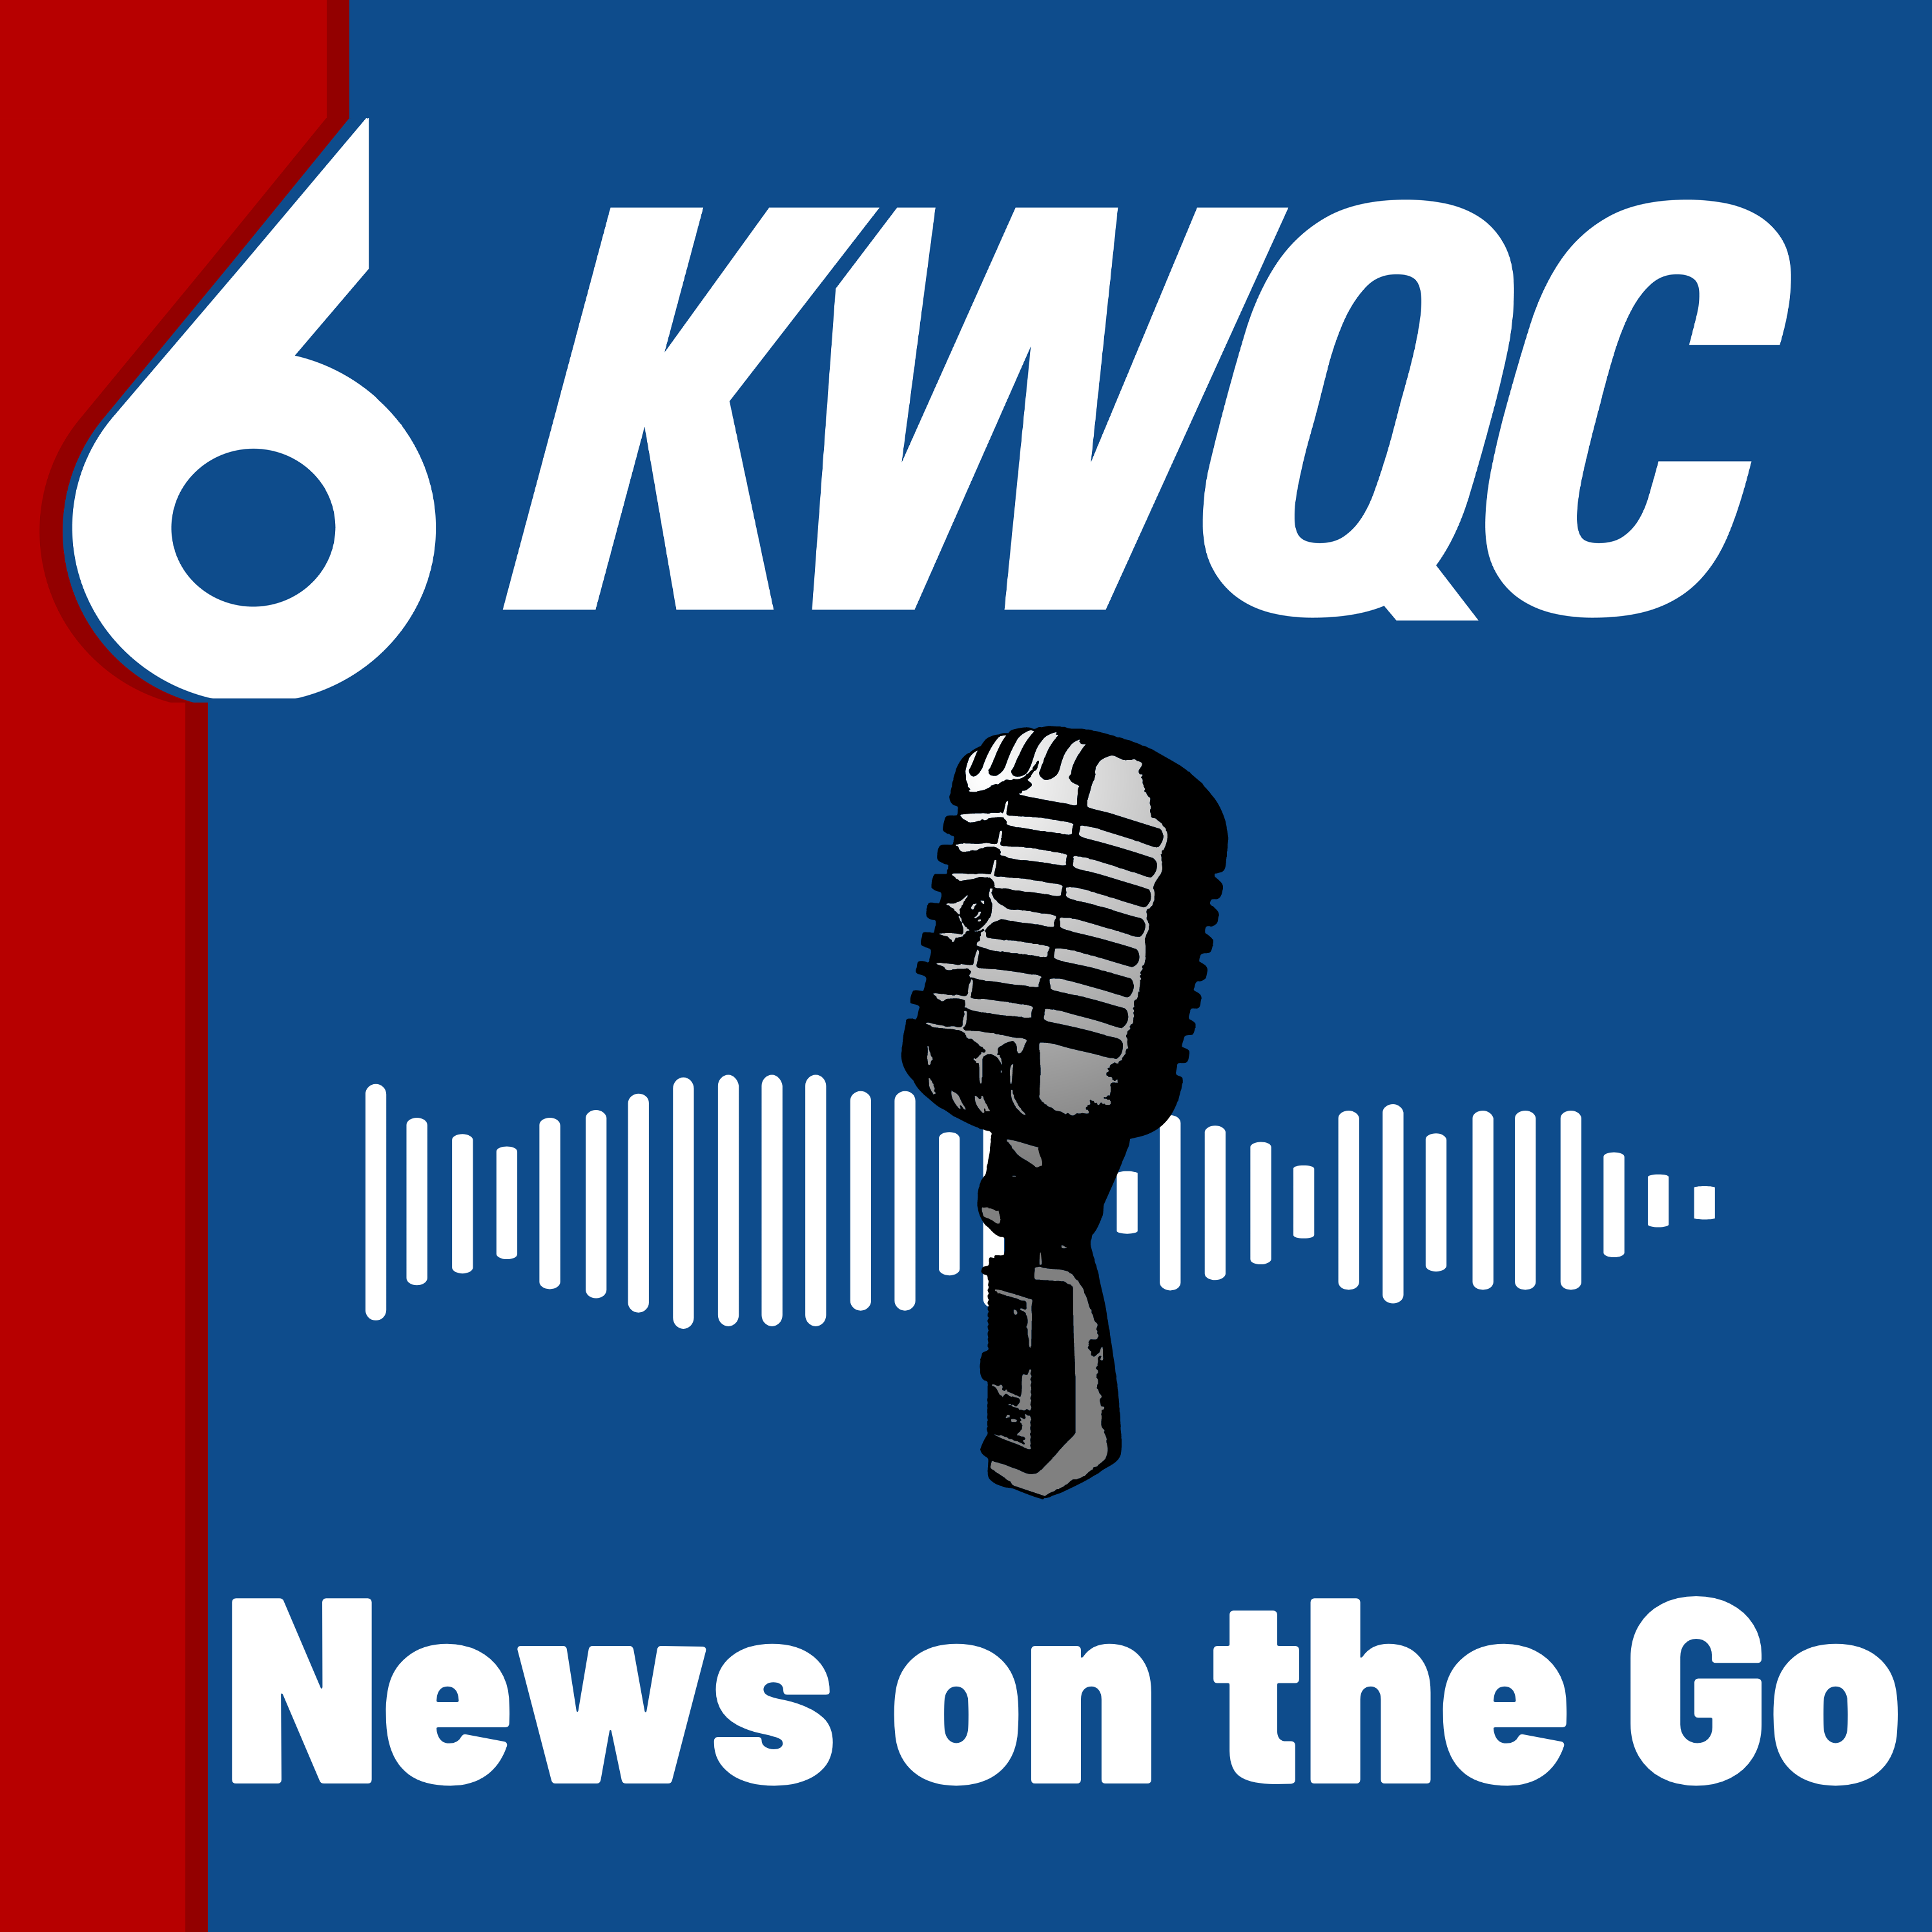 KWQC News on the Go